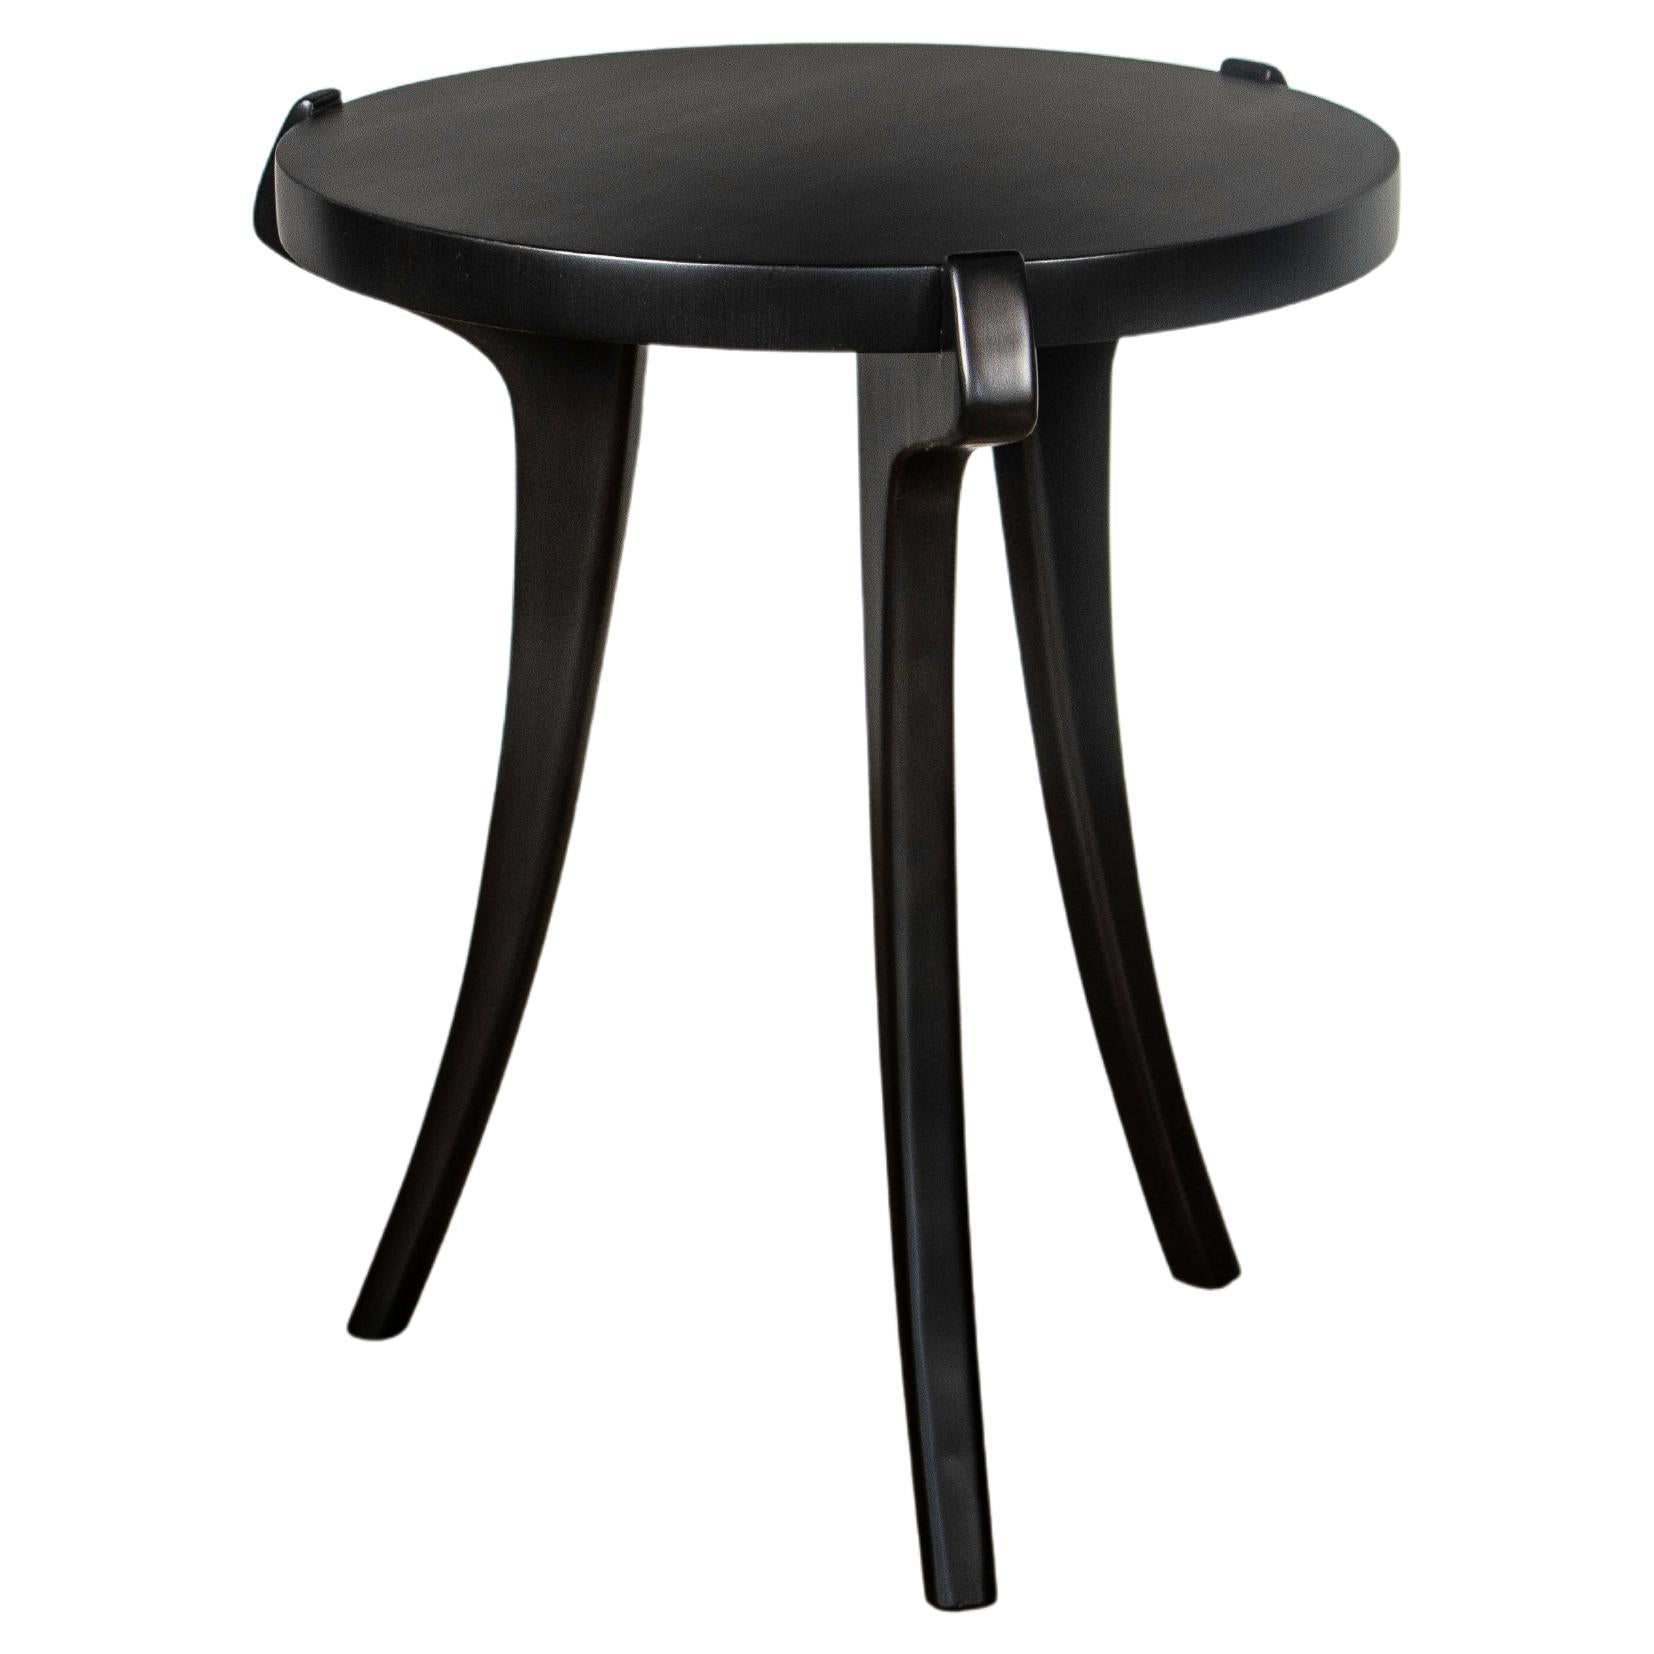 Sabre Legged Modern Round Side Cocktail Table in Ebony from Costantini, Uccello For Sale